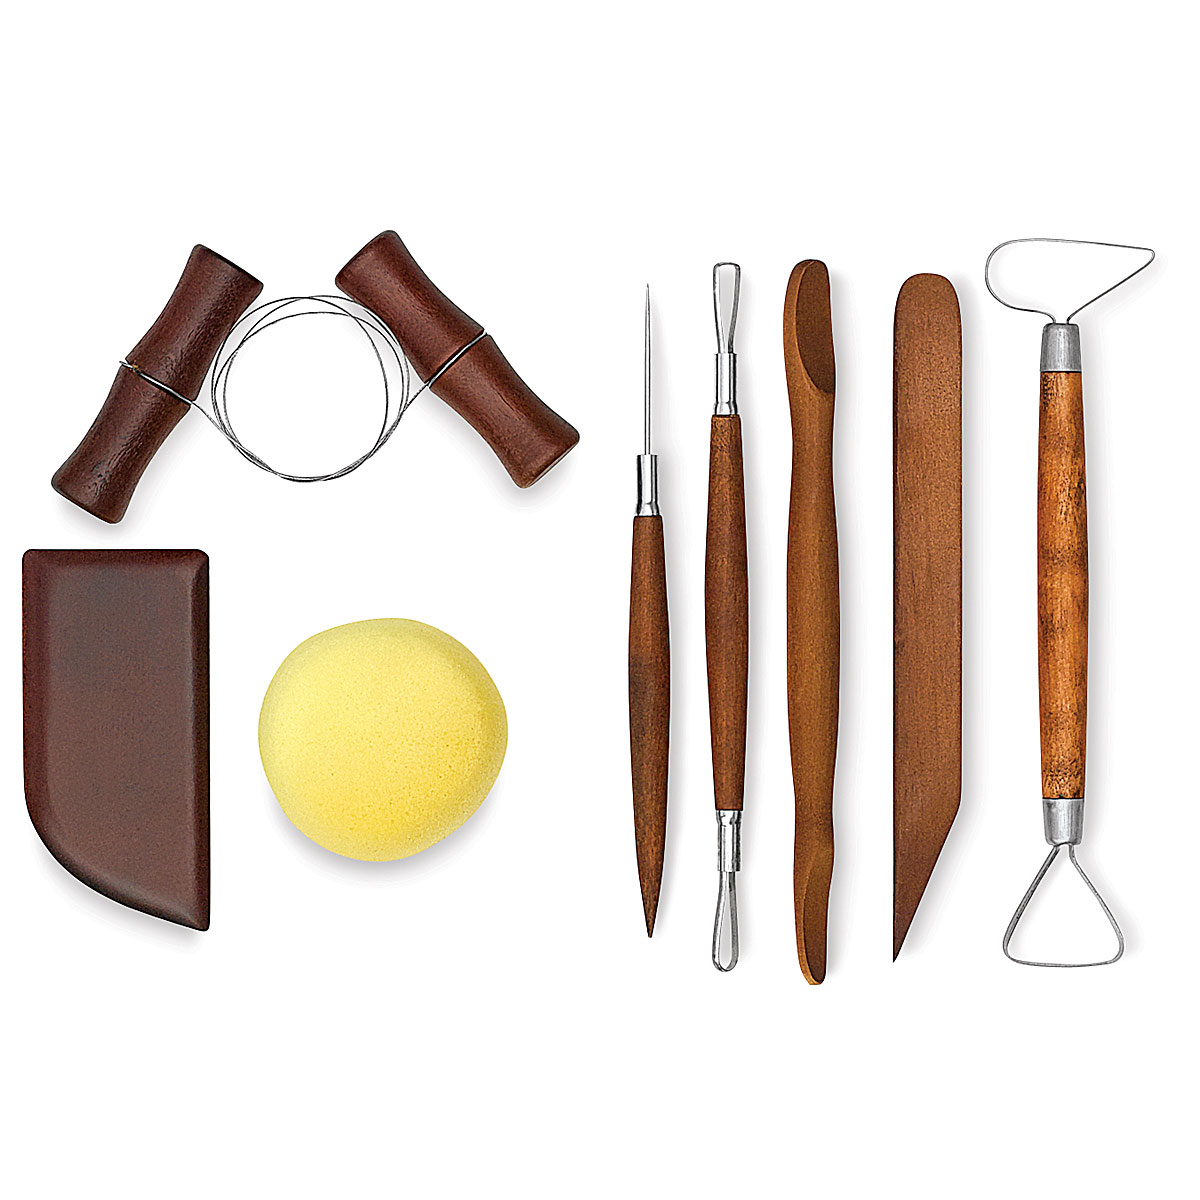 Beginners guide to basic pottery tools 